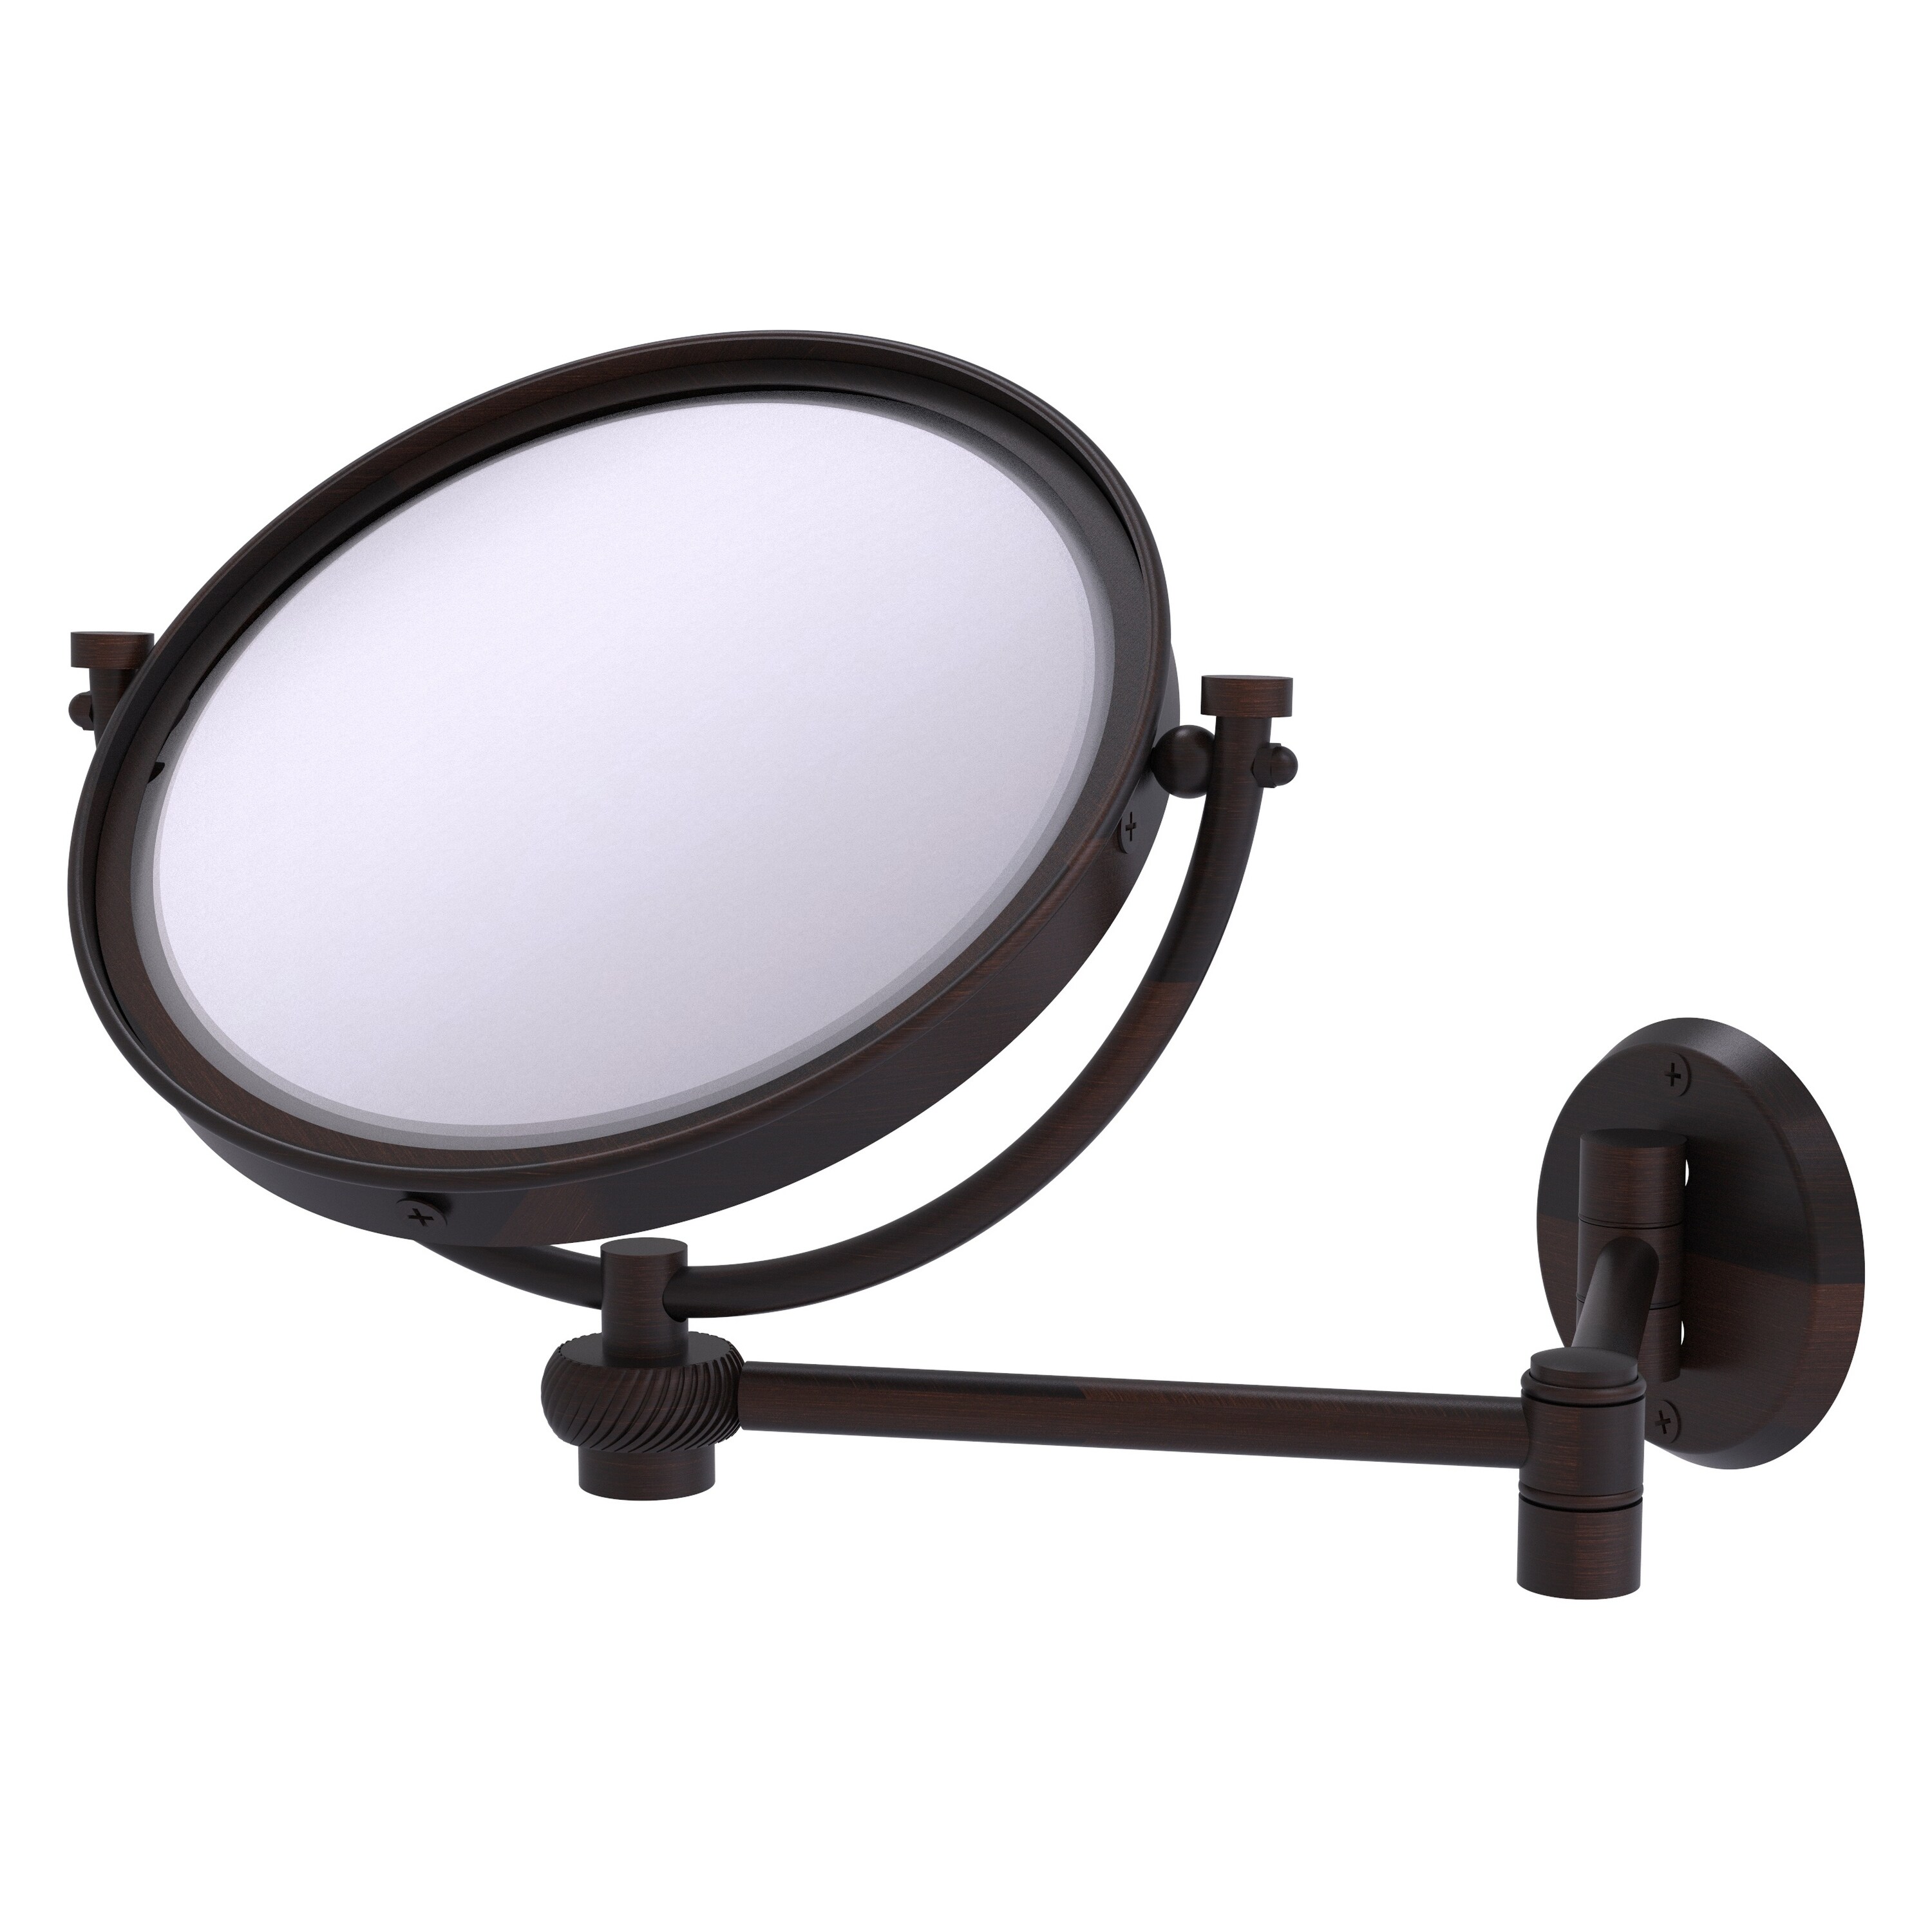 8-in x 10-in Distressed White Double-sided 5X Magnifying Wall-mounted Vanity Mirror | - Allied Brass WM-6T/4X-VB